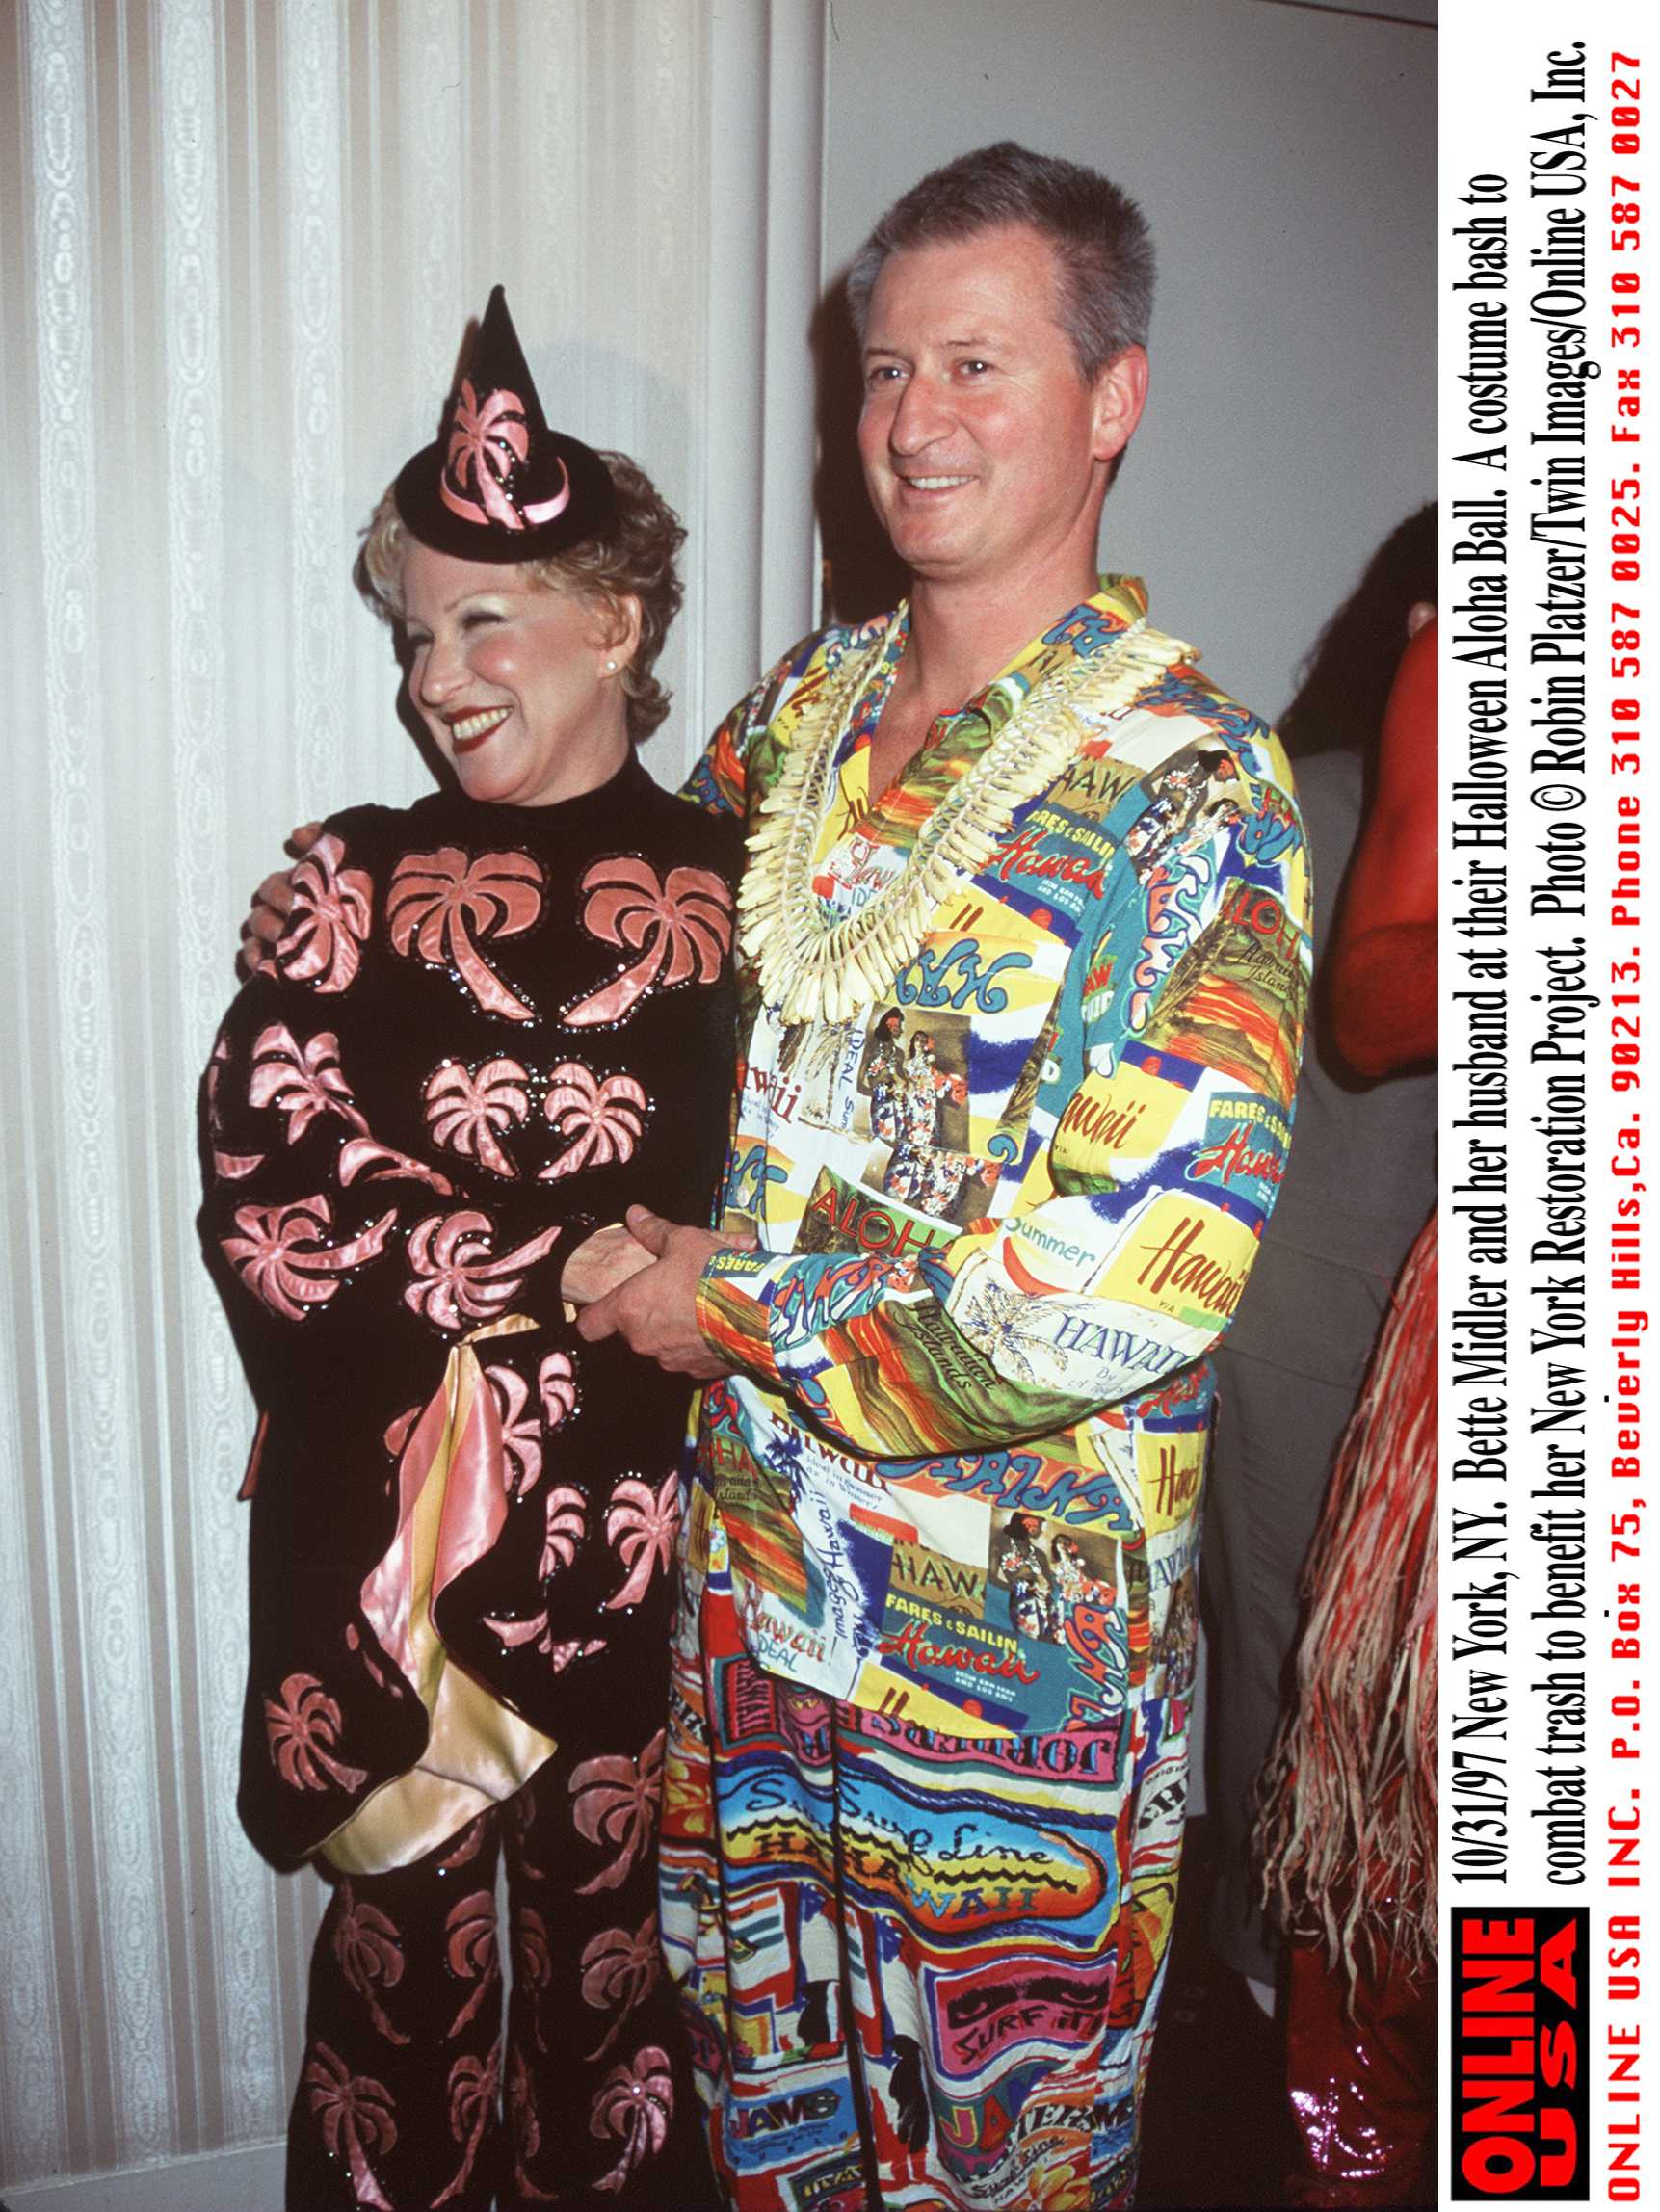 Singer Bette Midler and husband Martin von Haselberg at their Halloween Aloha Ball in October 1997 | Source: Getty Images